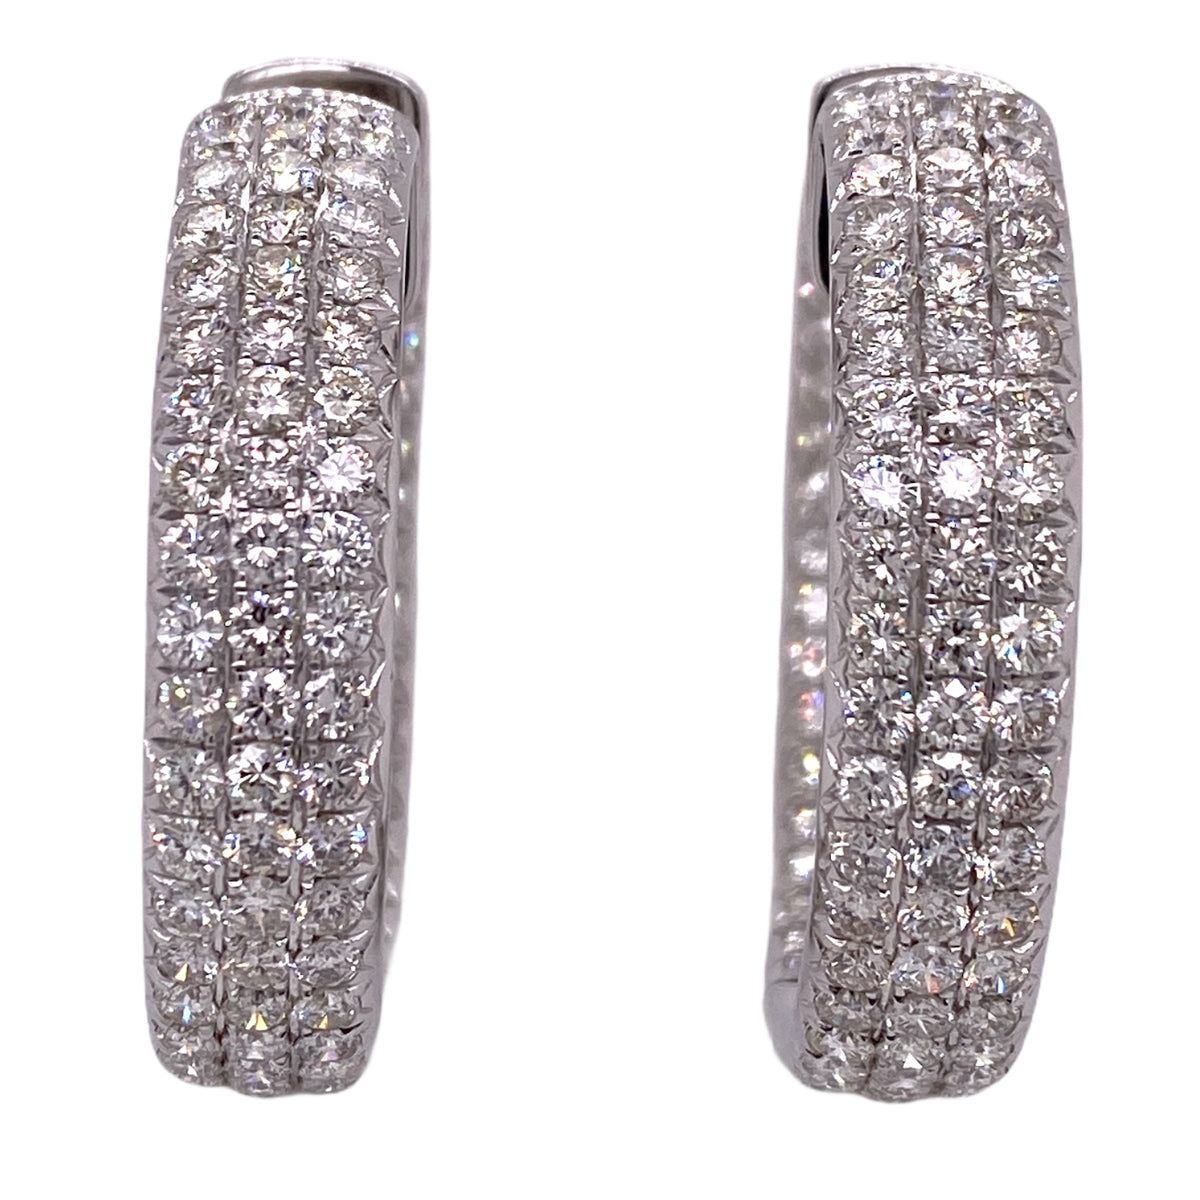 Louis Vuitton White Gold and Diamond Hoop Earrings, Contemporary Jewelry